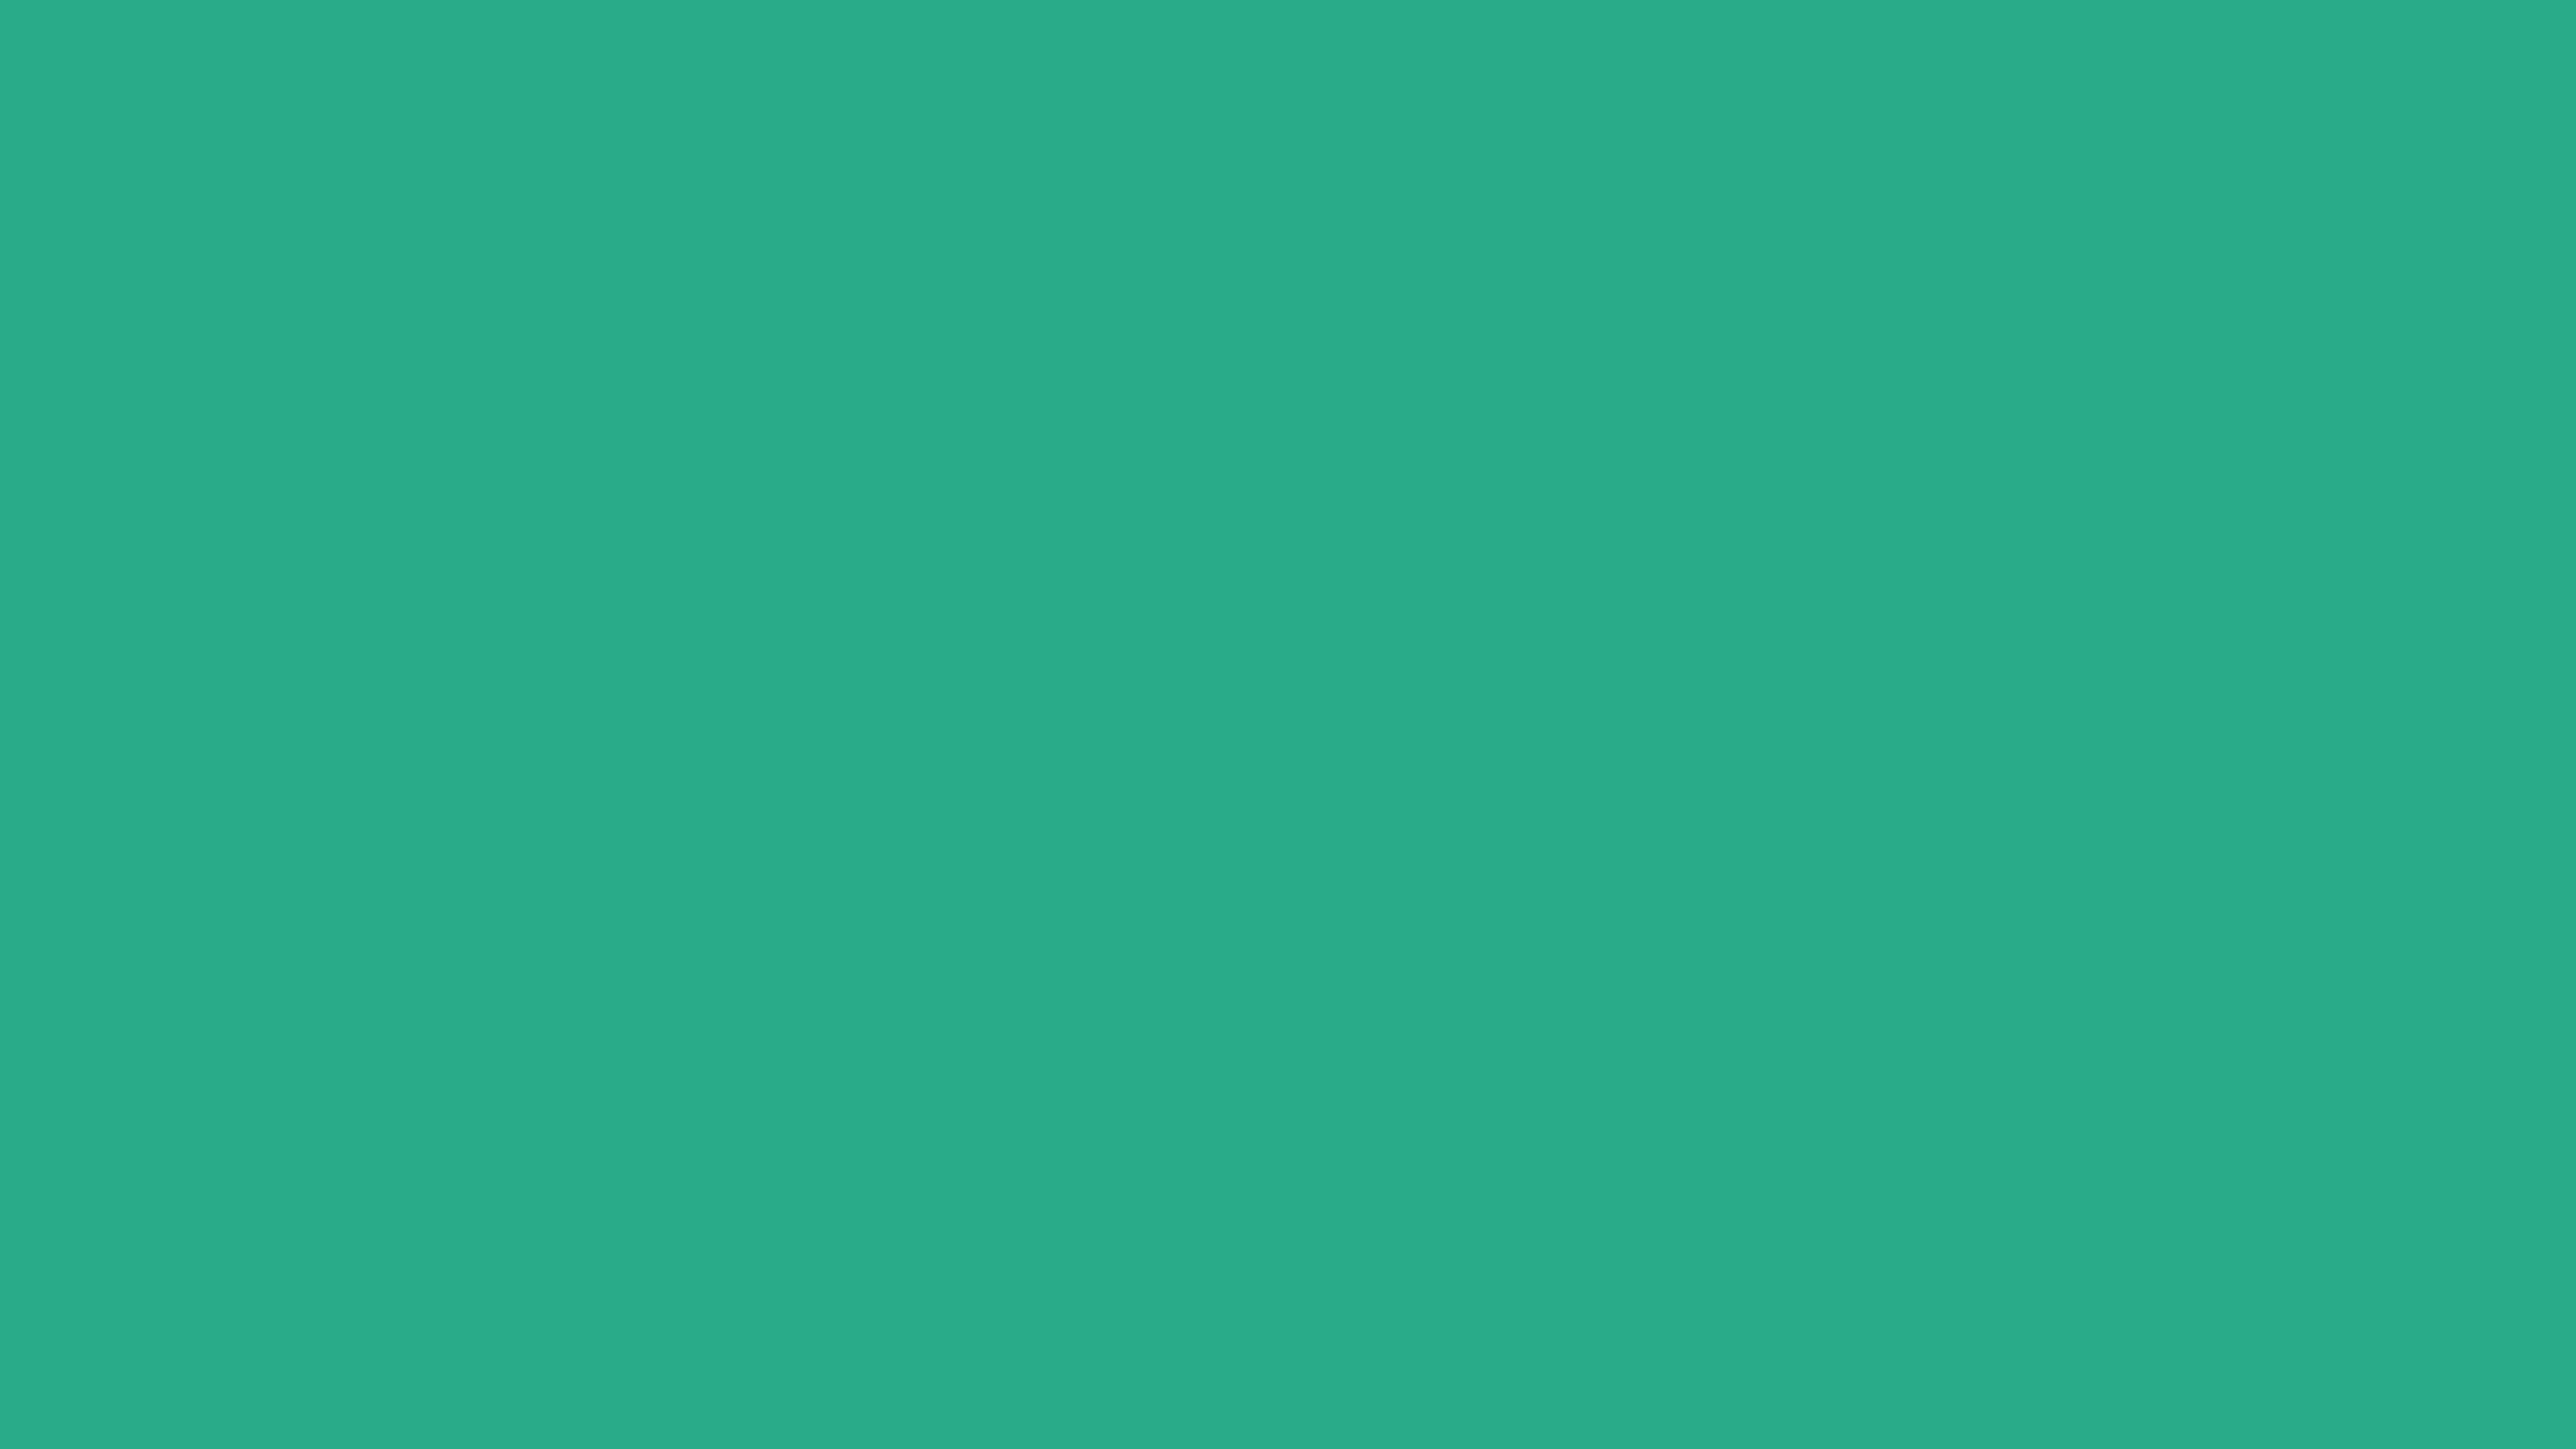 5120x2880 Jungle Green Solid Color Background